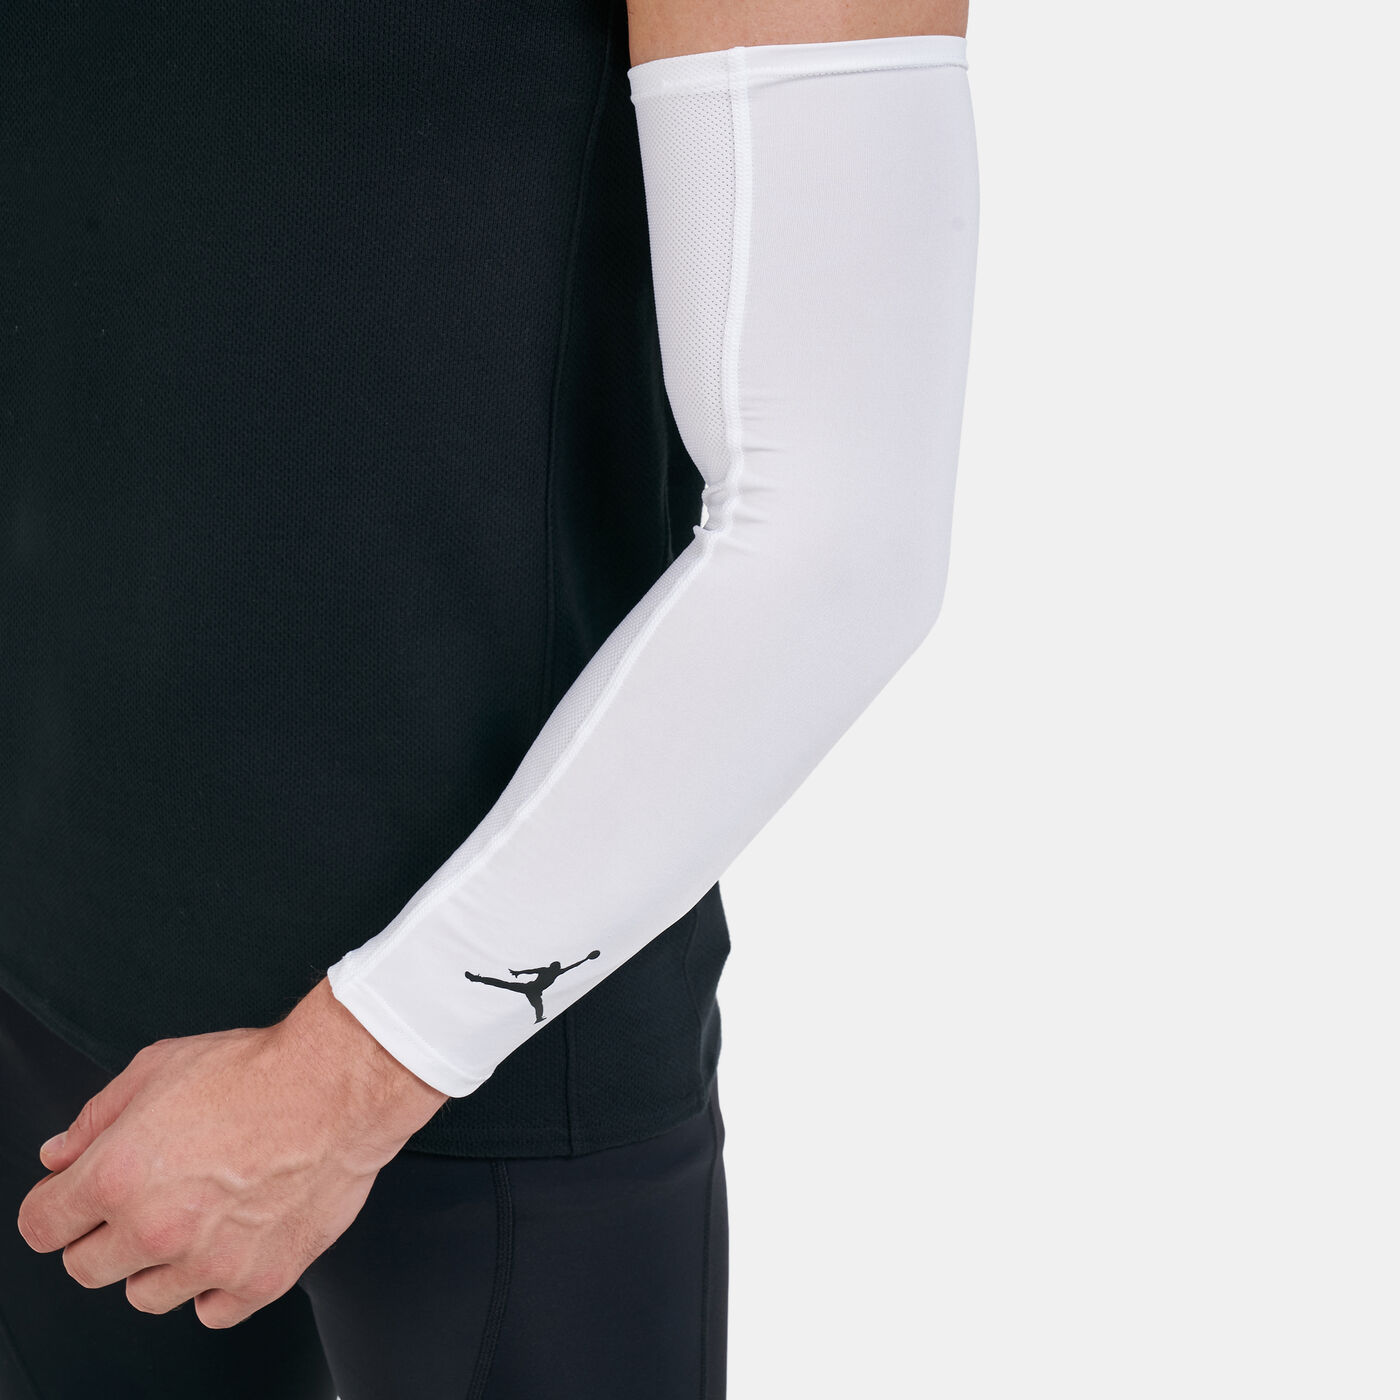 Shooter Arm Sleeves